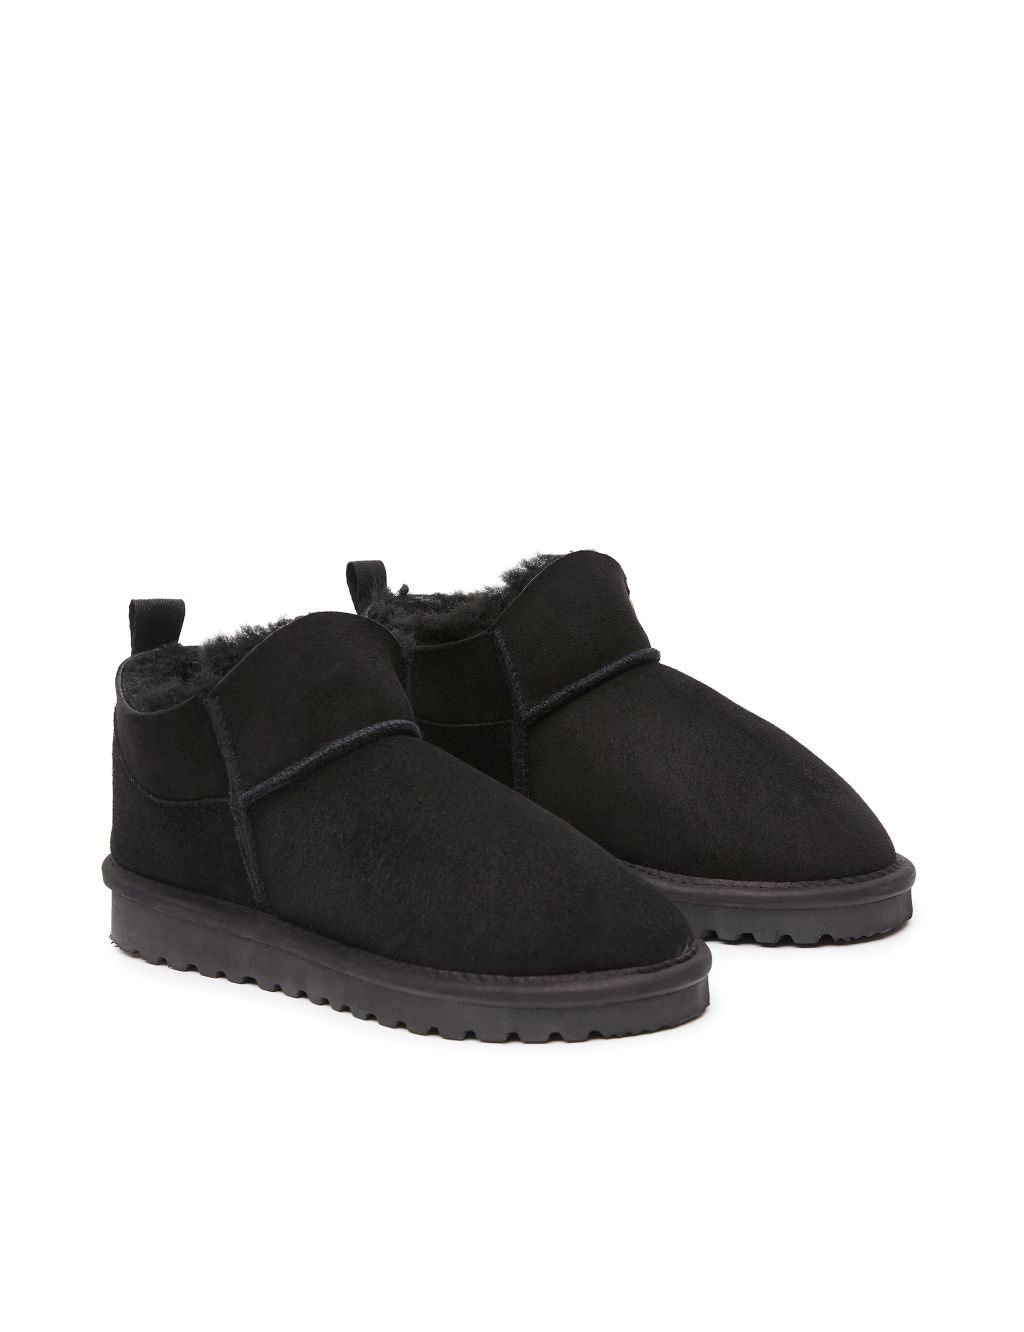 Short Sheepskin Lining Flat Ankle Boots 1 of 5